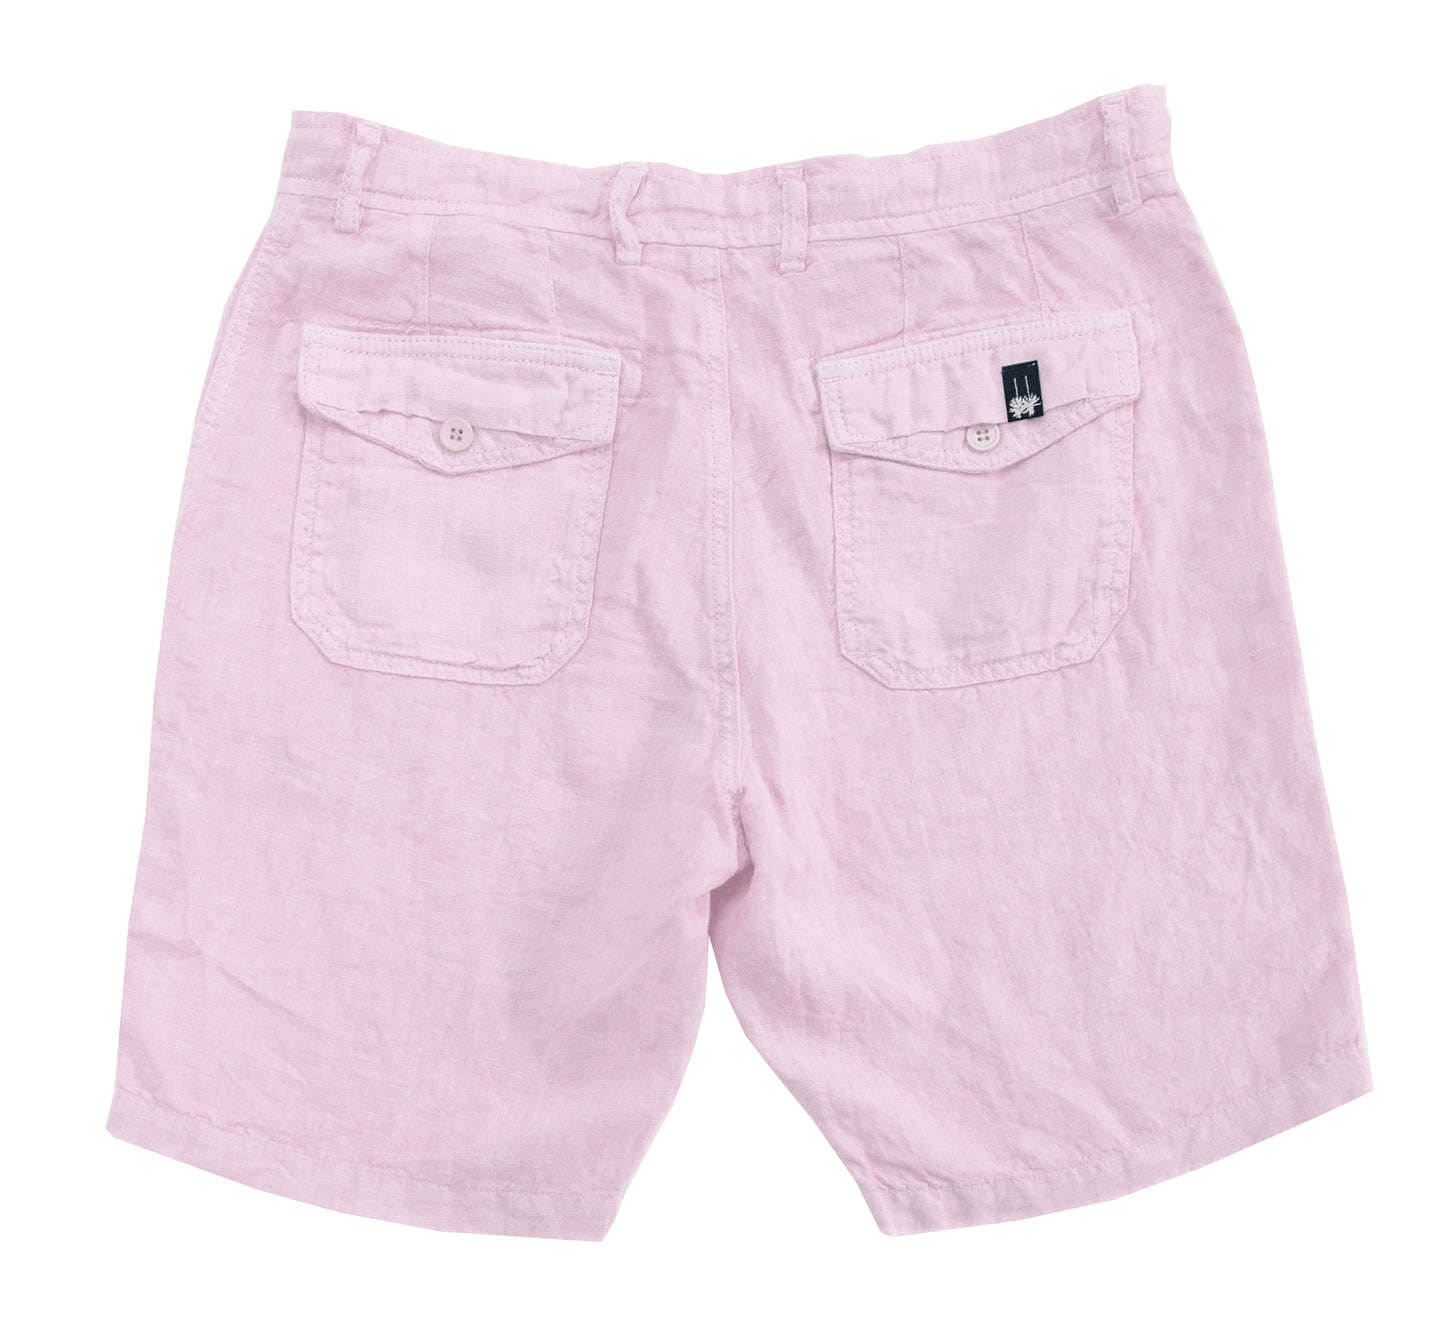 Palm Springs Pale Pink Linen Shorts